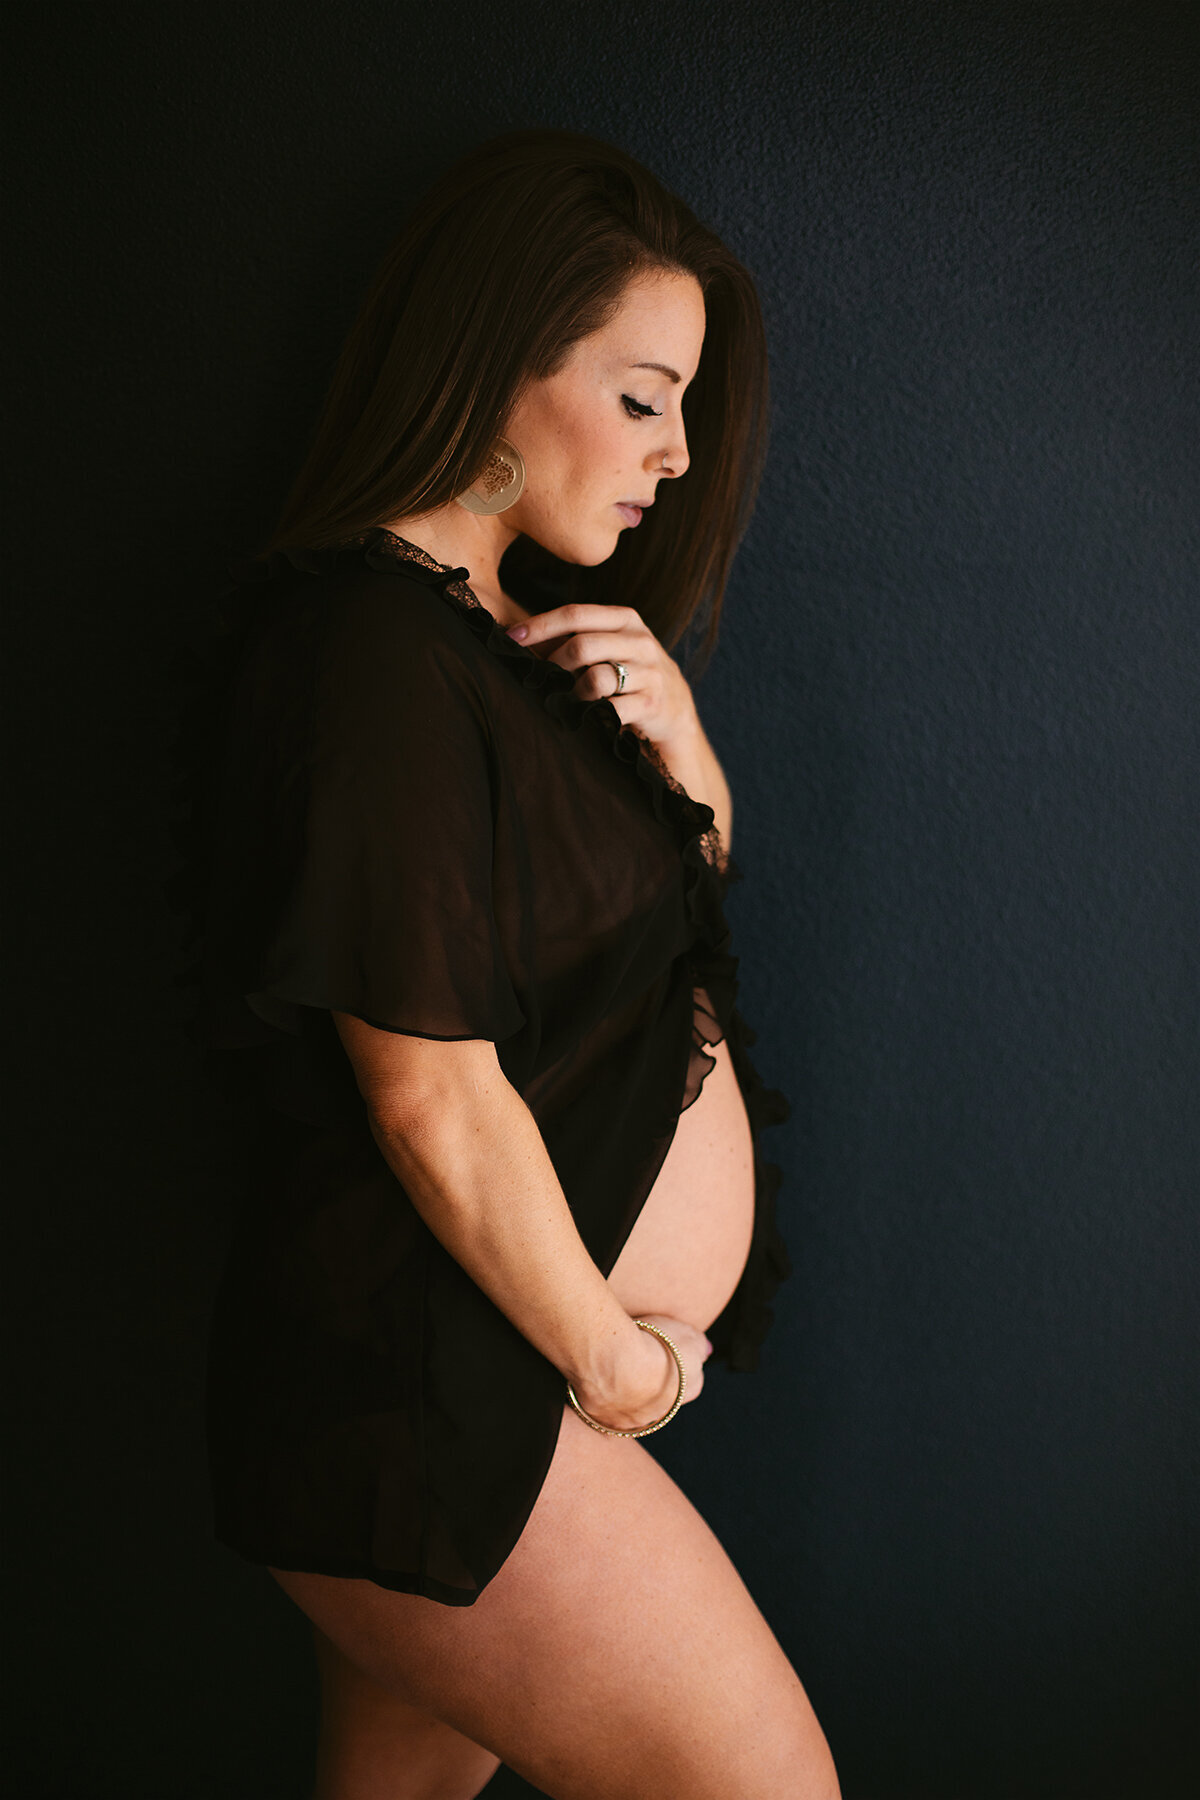 A pregnant woman in black lingerie leans against a blue wall for her maternity boudoir photoshoot.